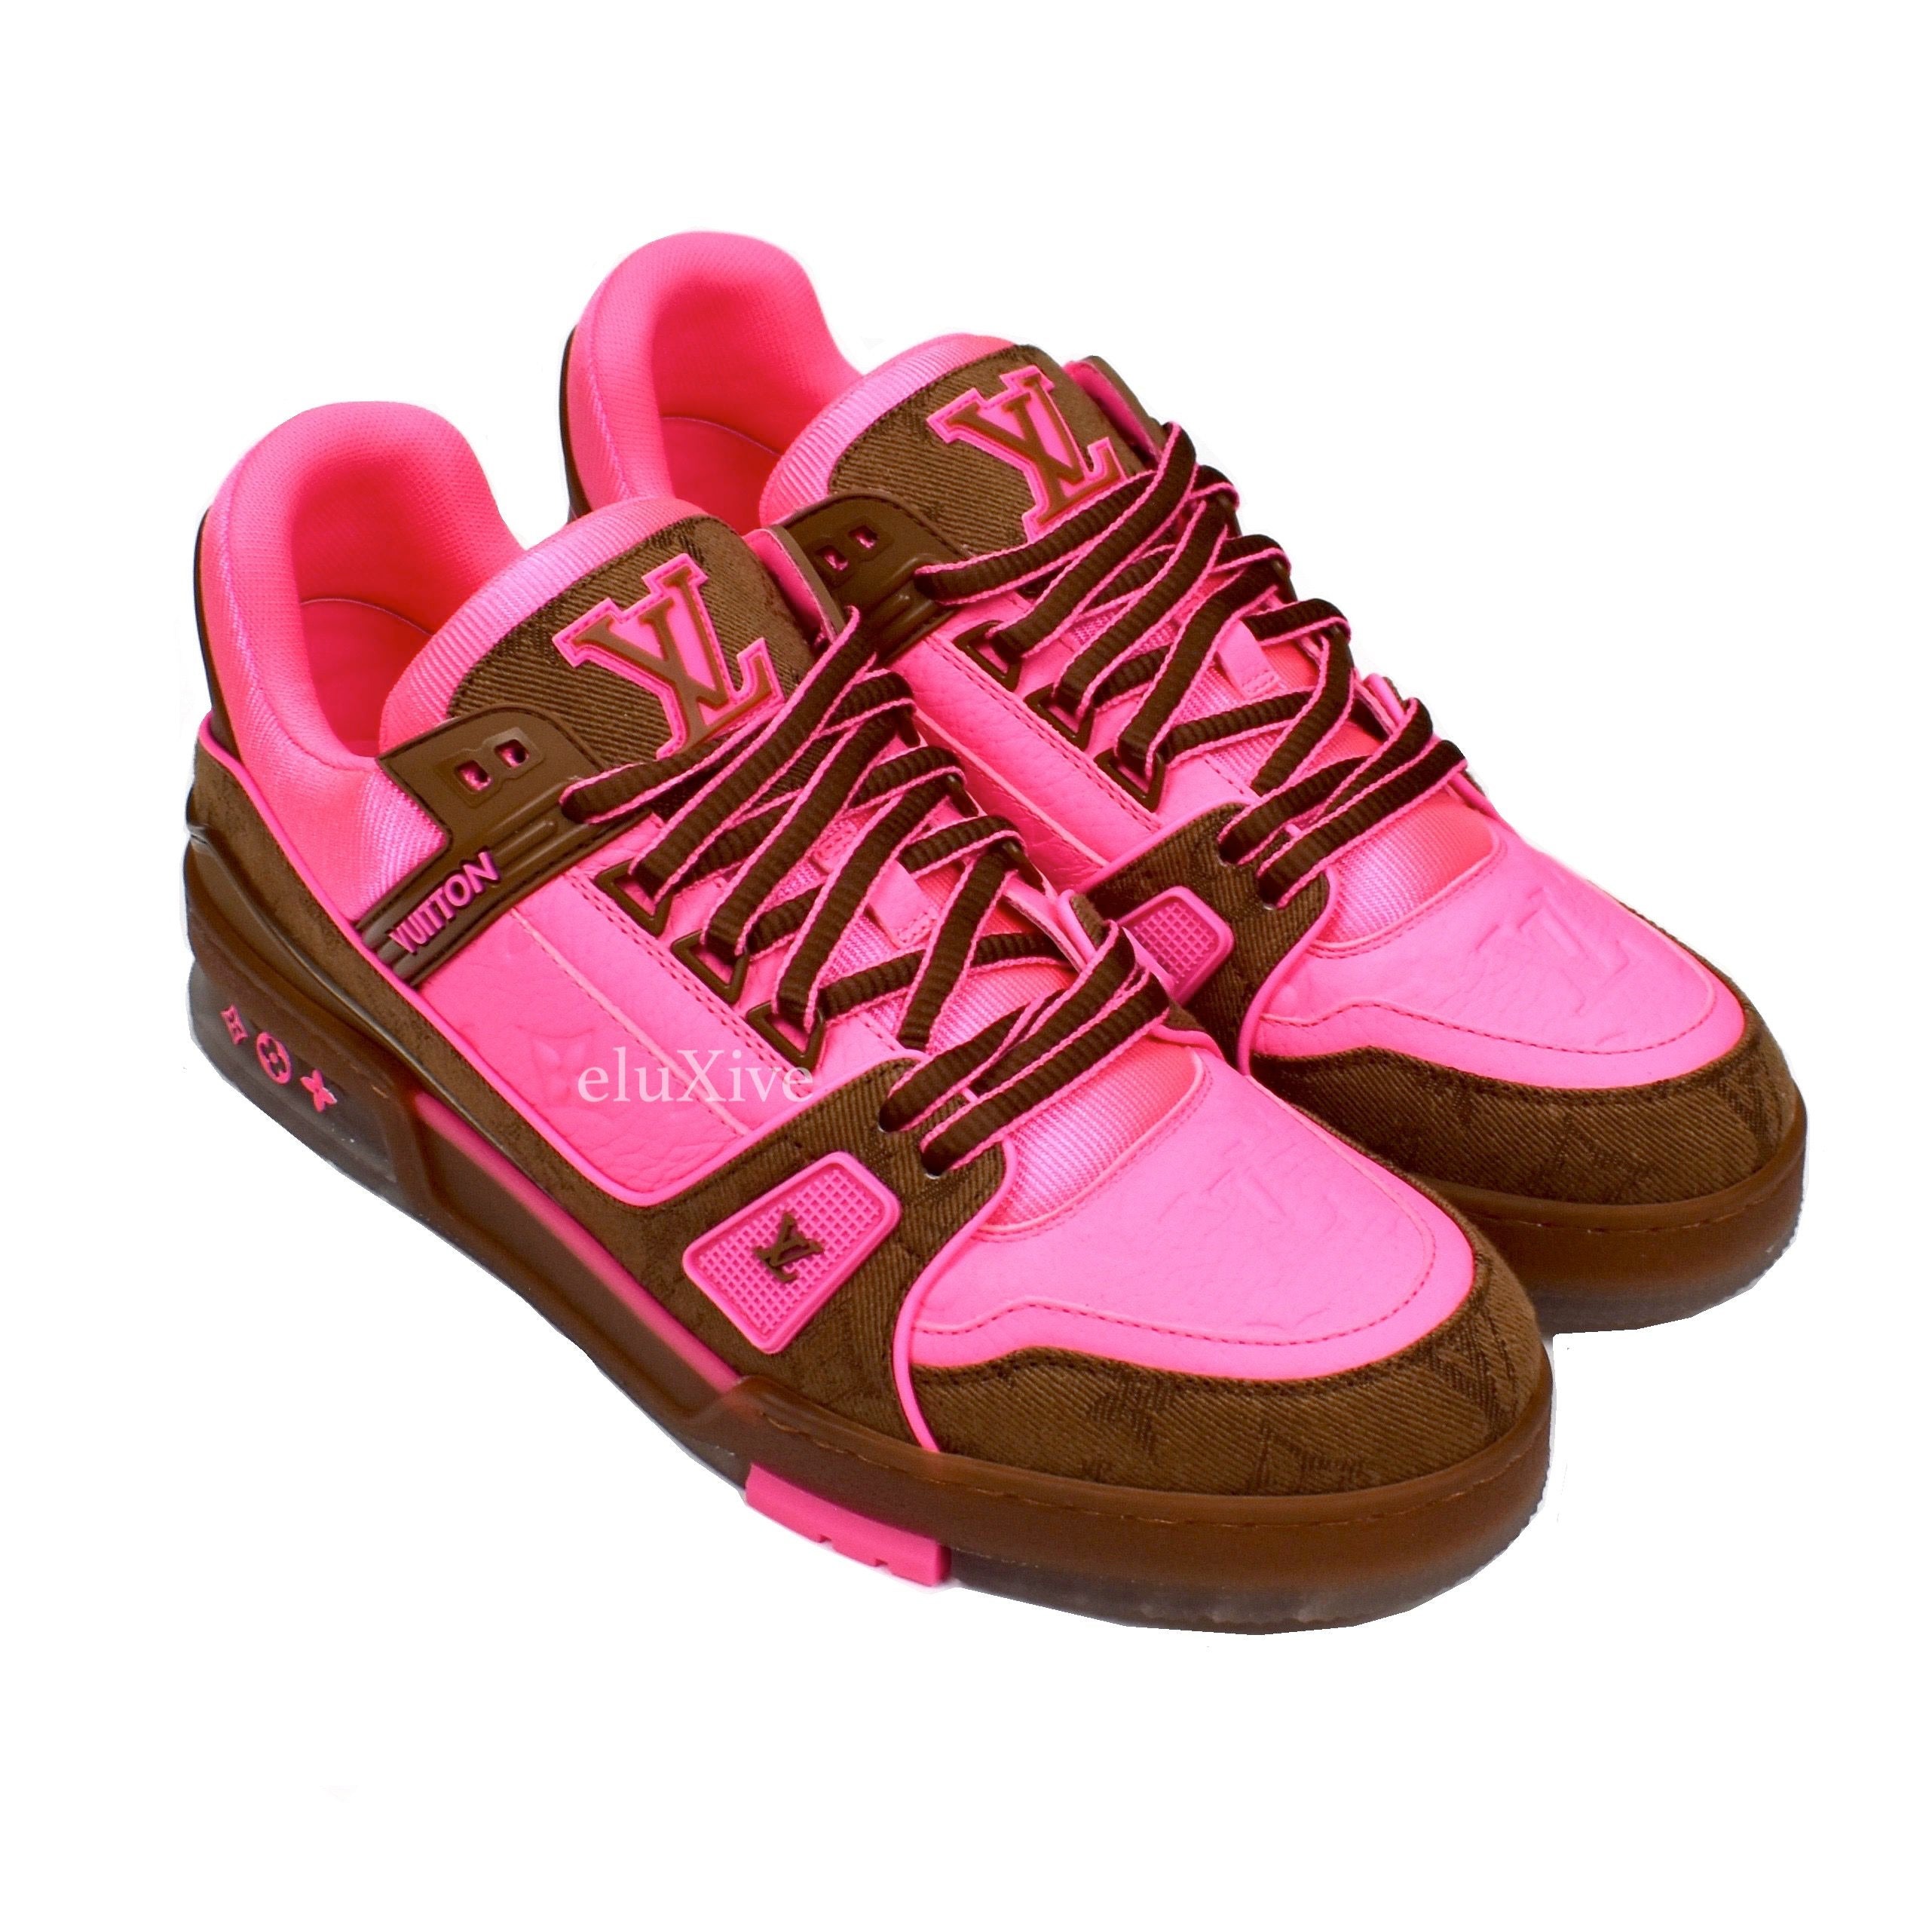 Louis Vuitton Trainer Sneakers - Pink Sneakers, Shoes - LOU802078